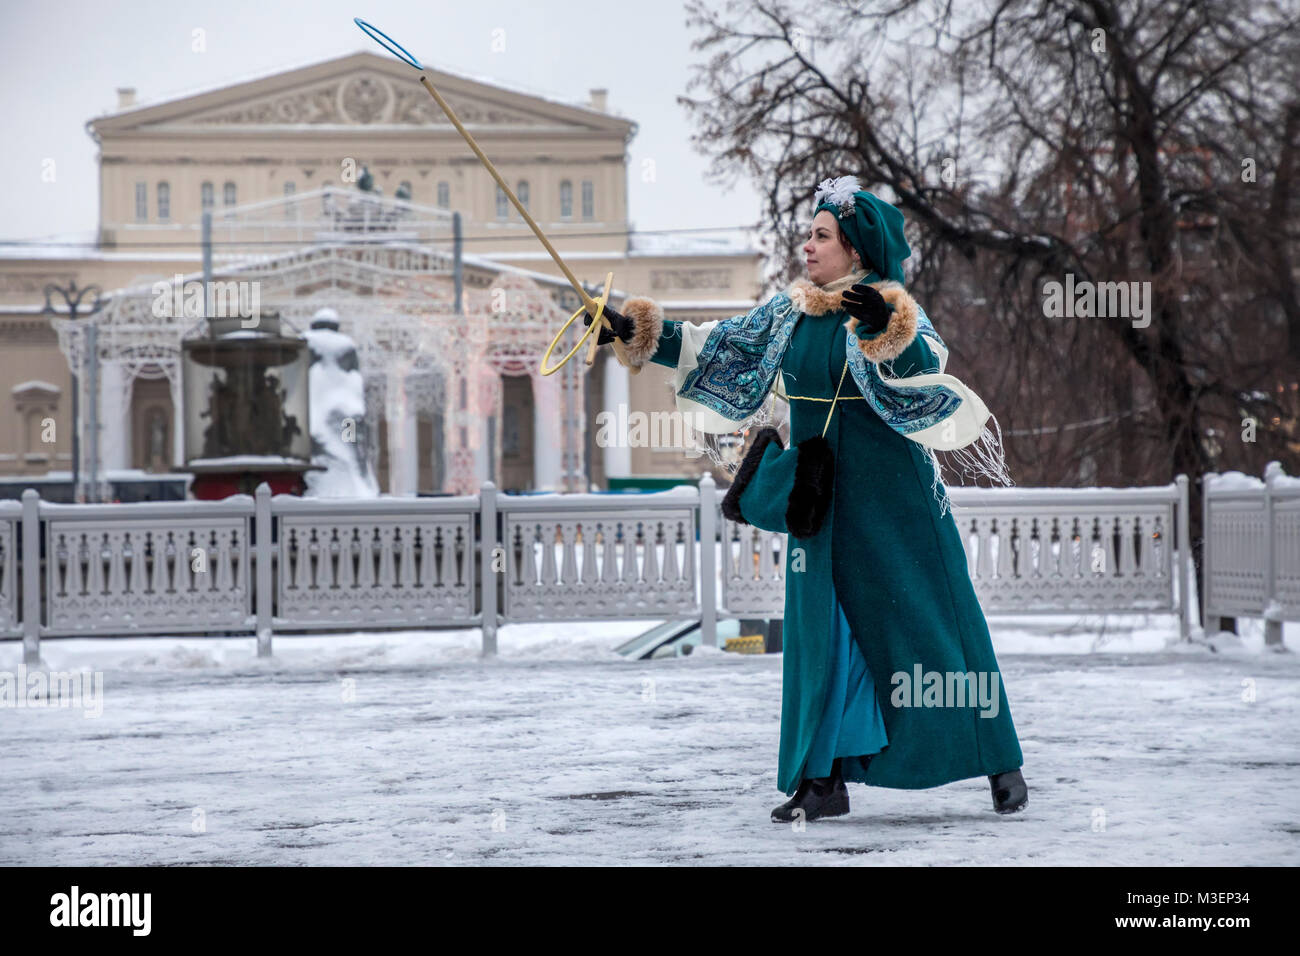 A lady in historical dress plays the game Serso on the Revolution Square on the background of the Bolshoi Theater in  center of Moscow, Russia Stock Photo